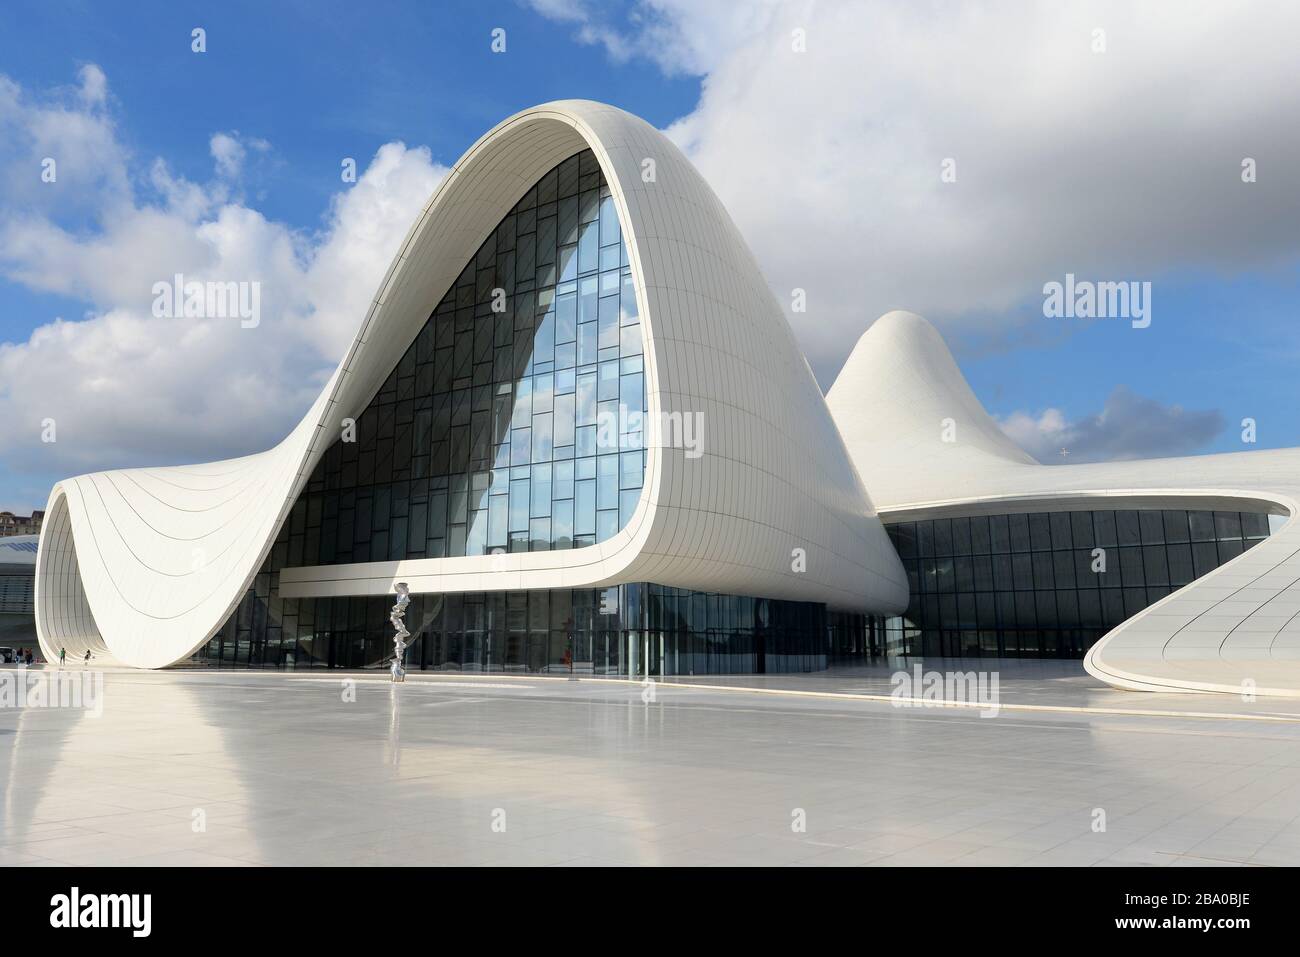 Heydar Aliyev Cultural Center in Baku, Azerbaijan. Architecture style by Zaha Hadid. Flowing and curved building built with white concrete and glass. Stock Photo